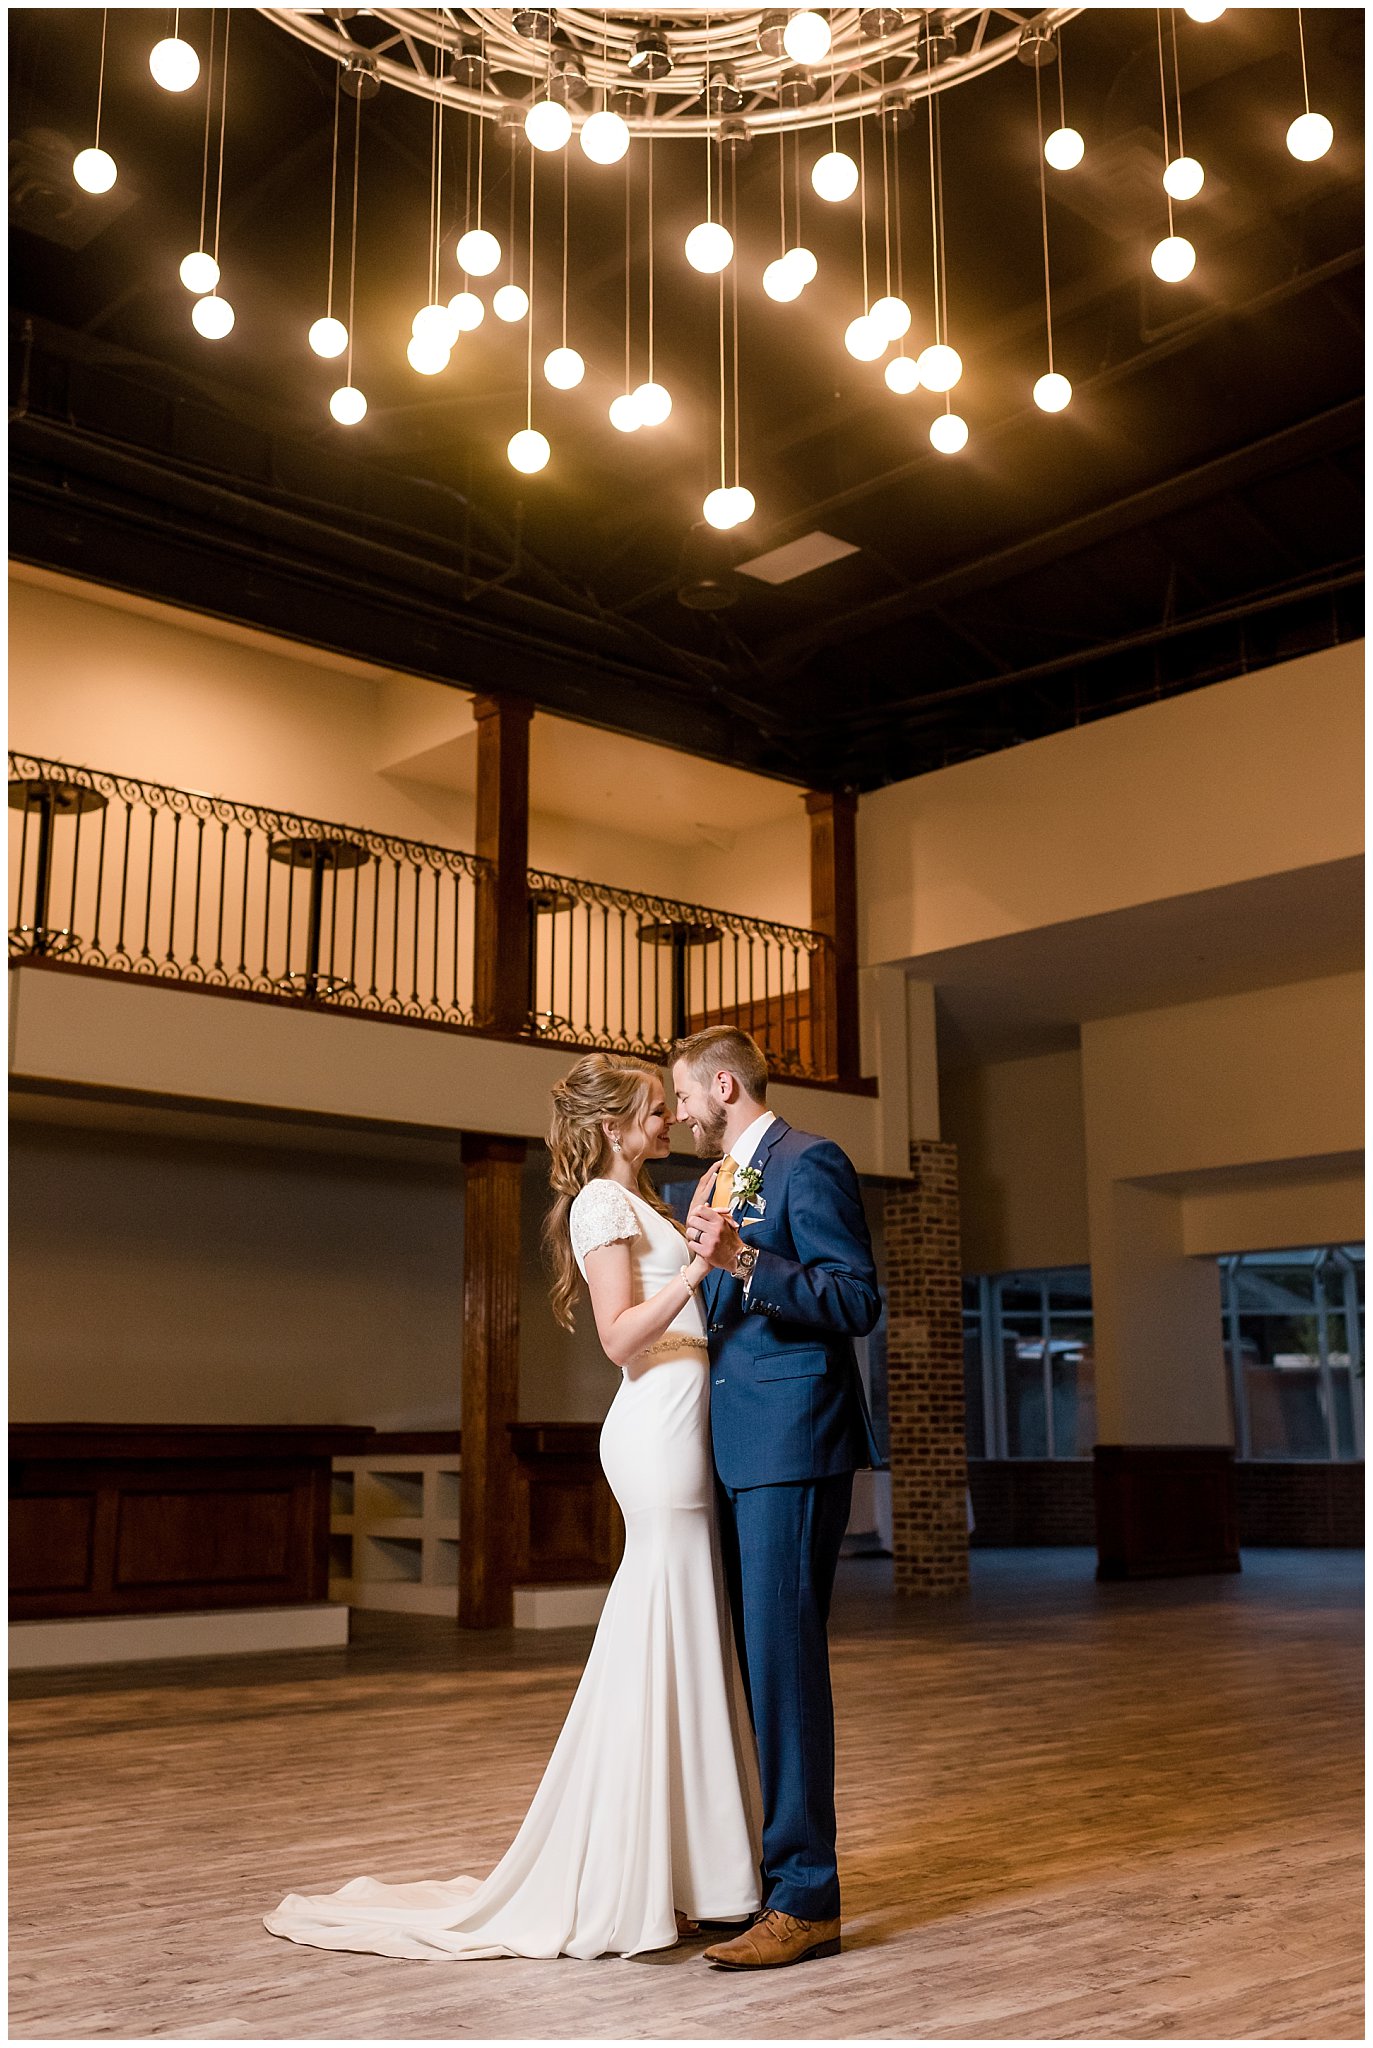 Bride and groom dancing at Talia Event center under the lights | Navy, white and gold wedding | Talia Event Center